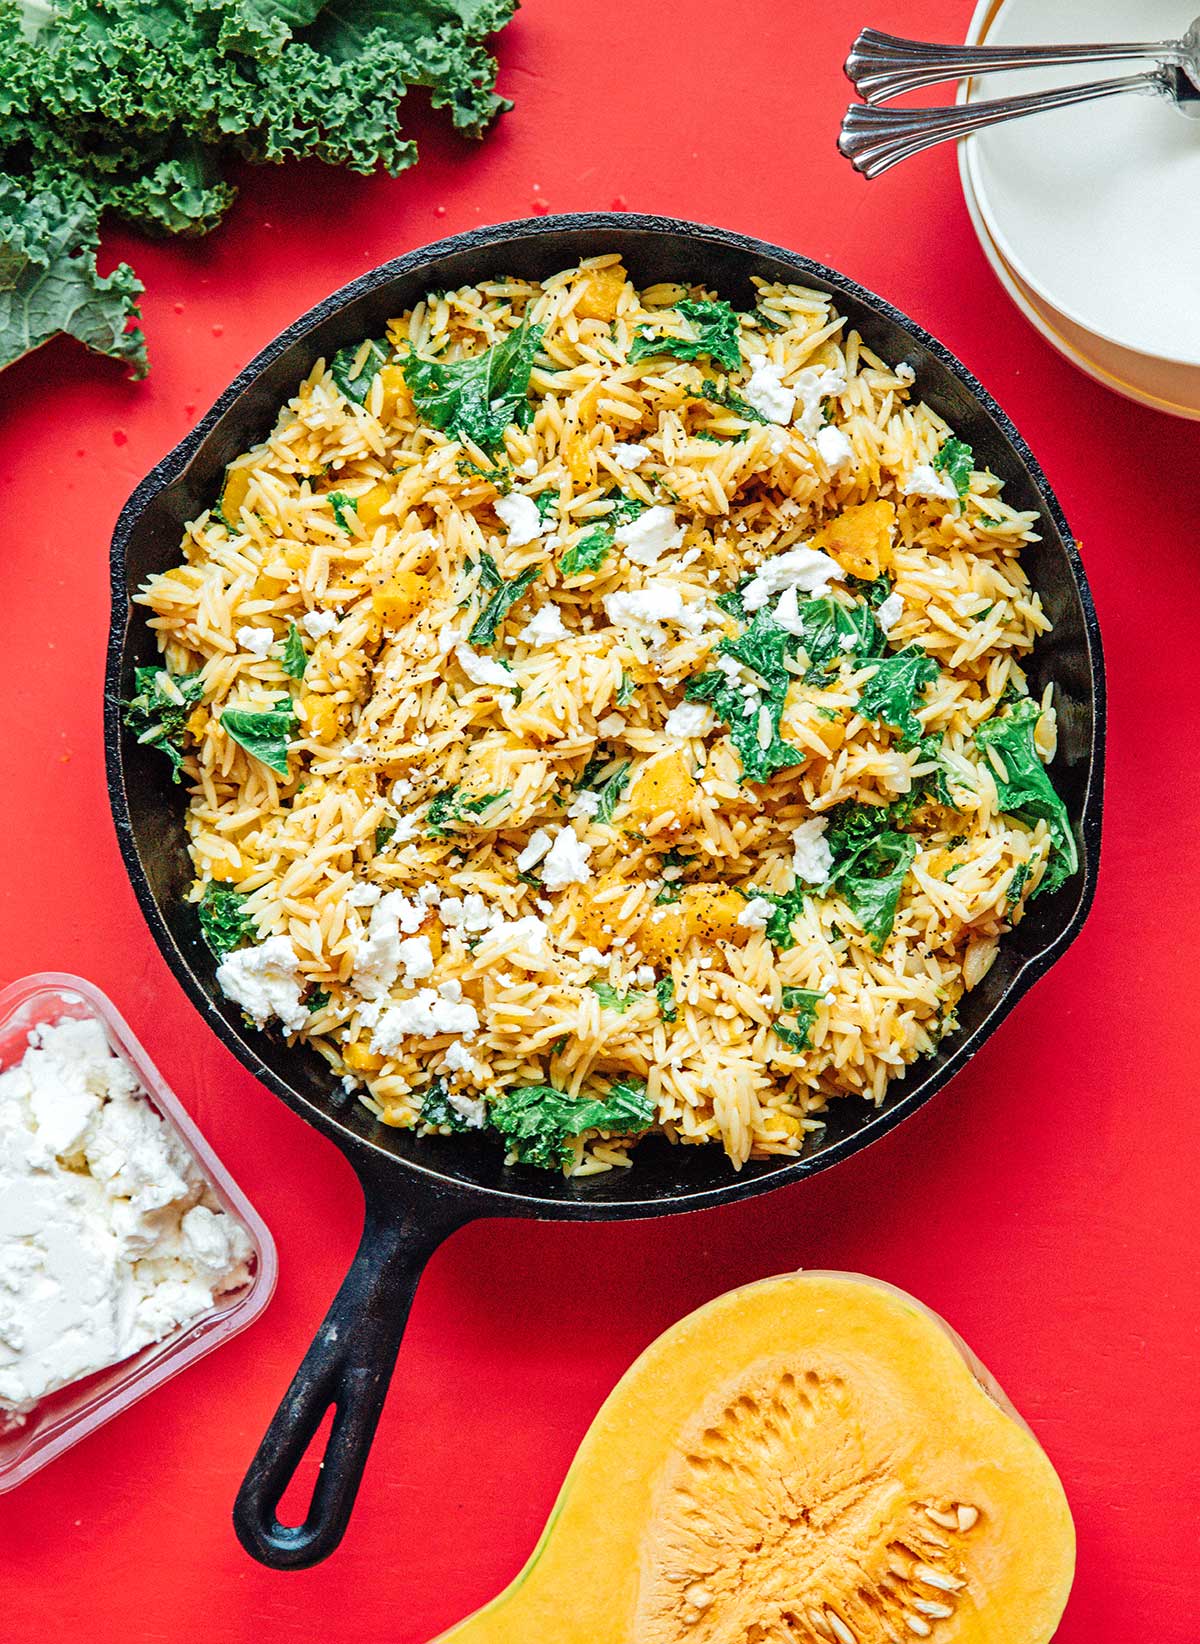 A cast iron skillet filled with cooked kale and white onion, butternut squash, orzo, and various spices